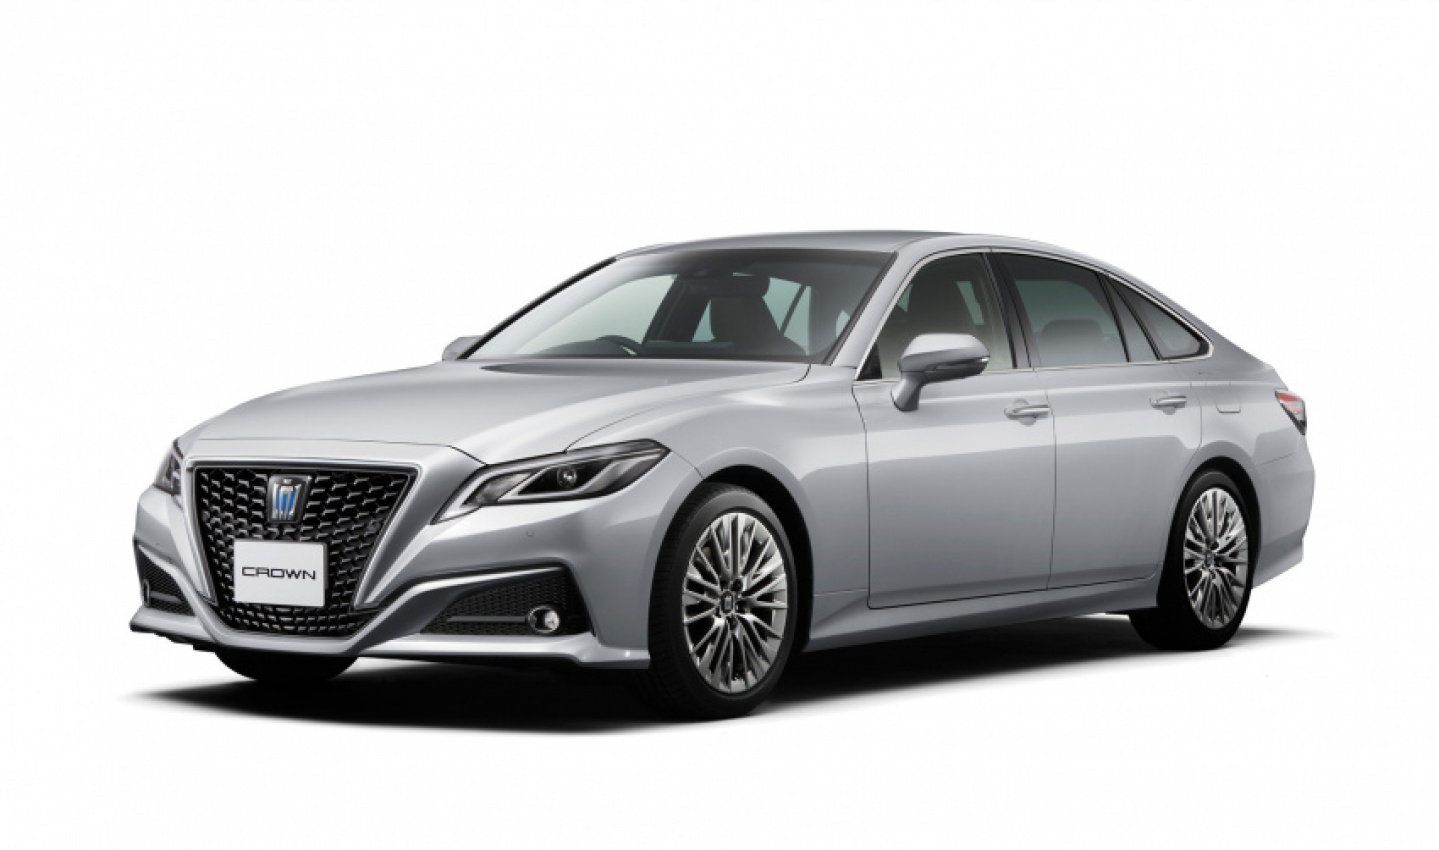 auto news, autos, cars, toyota, crown, electric vehicle, hybrid, plug-in hybrid, toyota crown, toyota crown to make global comeback with suv model